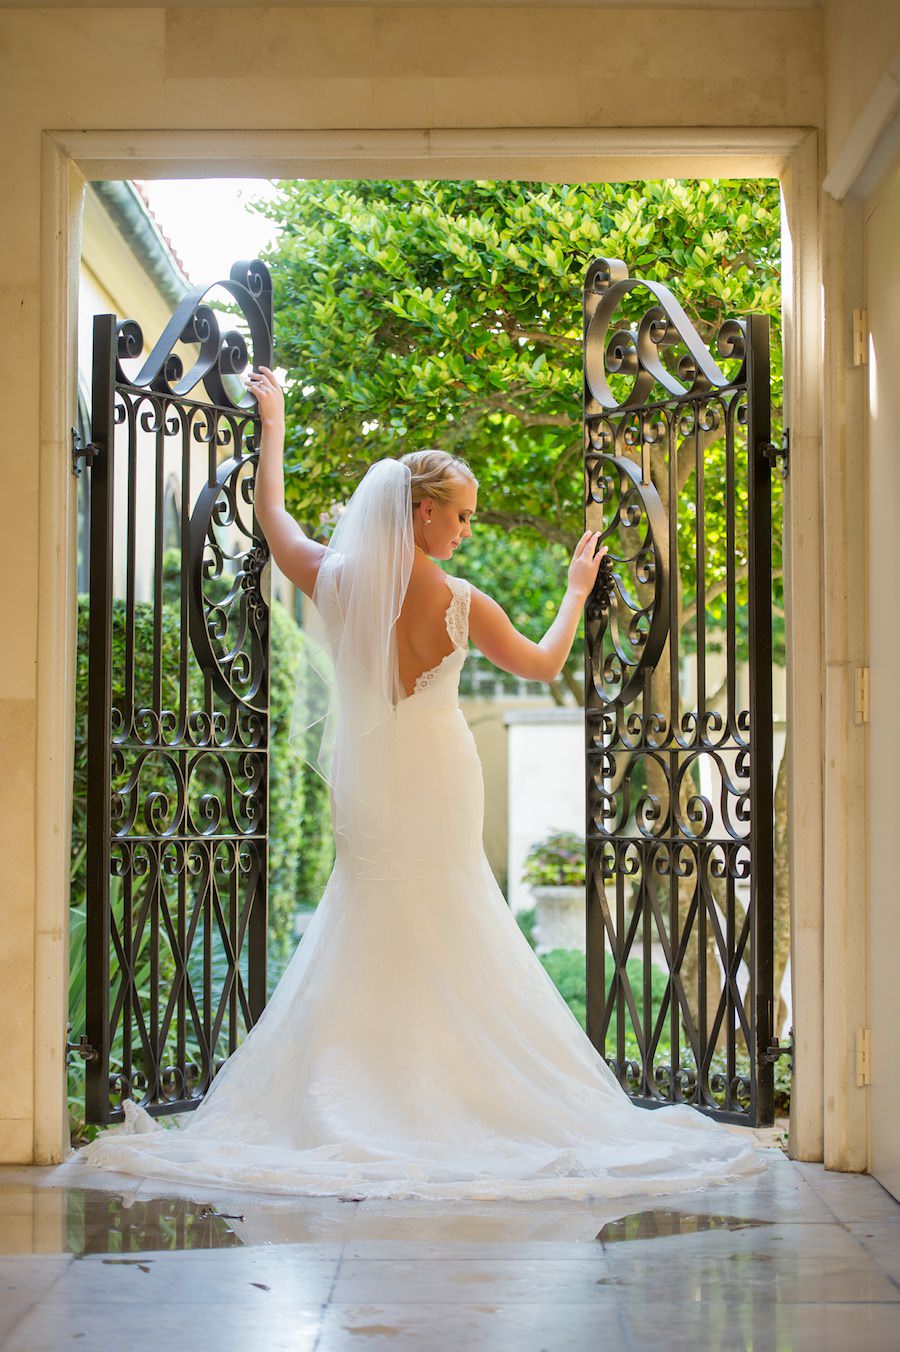 Bridal Wedding Portrait in White Open Back Lace Wedding Dress Against Rod Iron Gate at Palma Ceia Country Club | Tampa Bay Wedding Photography Andi Diamond Photography